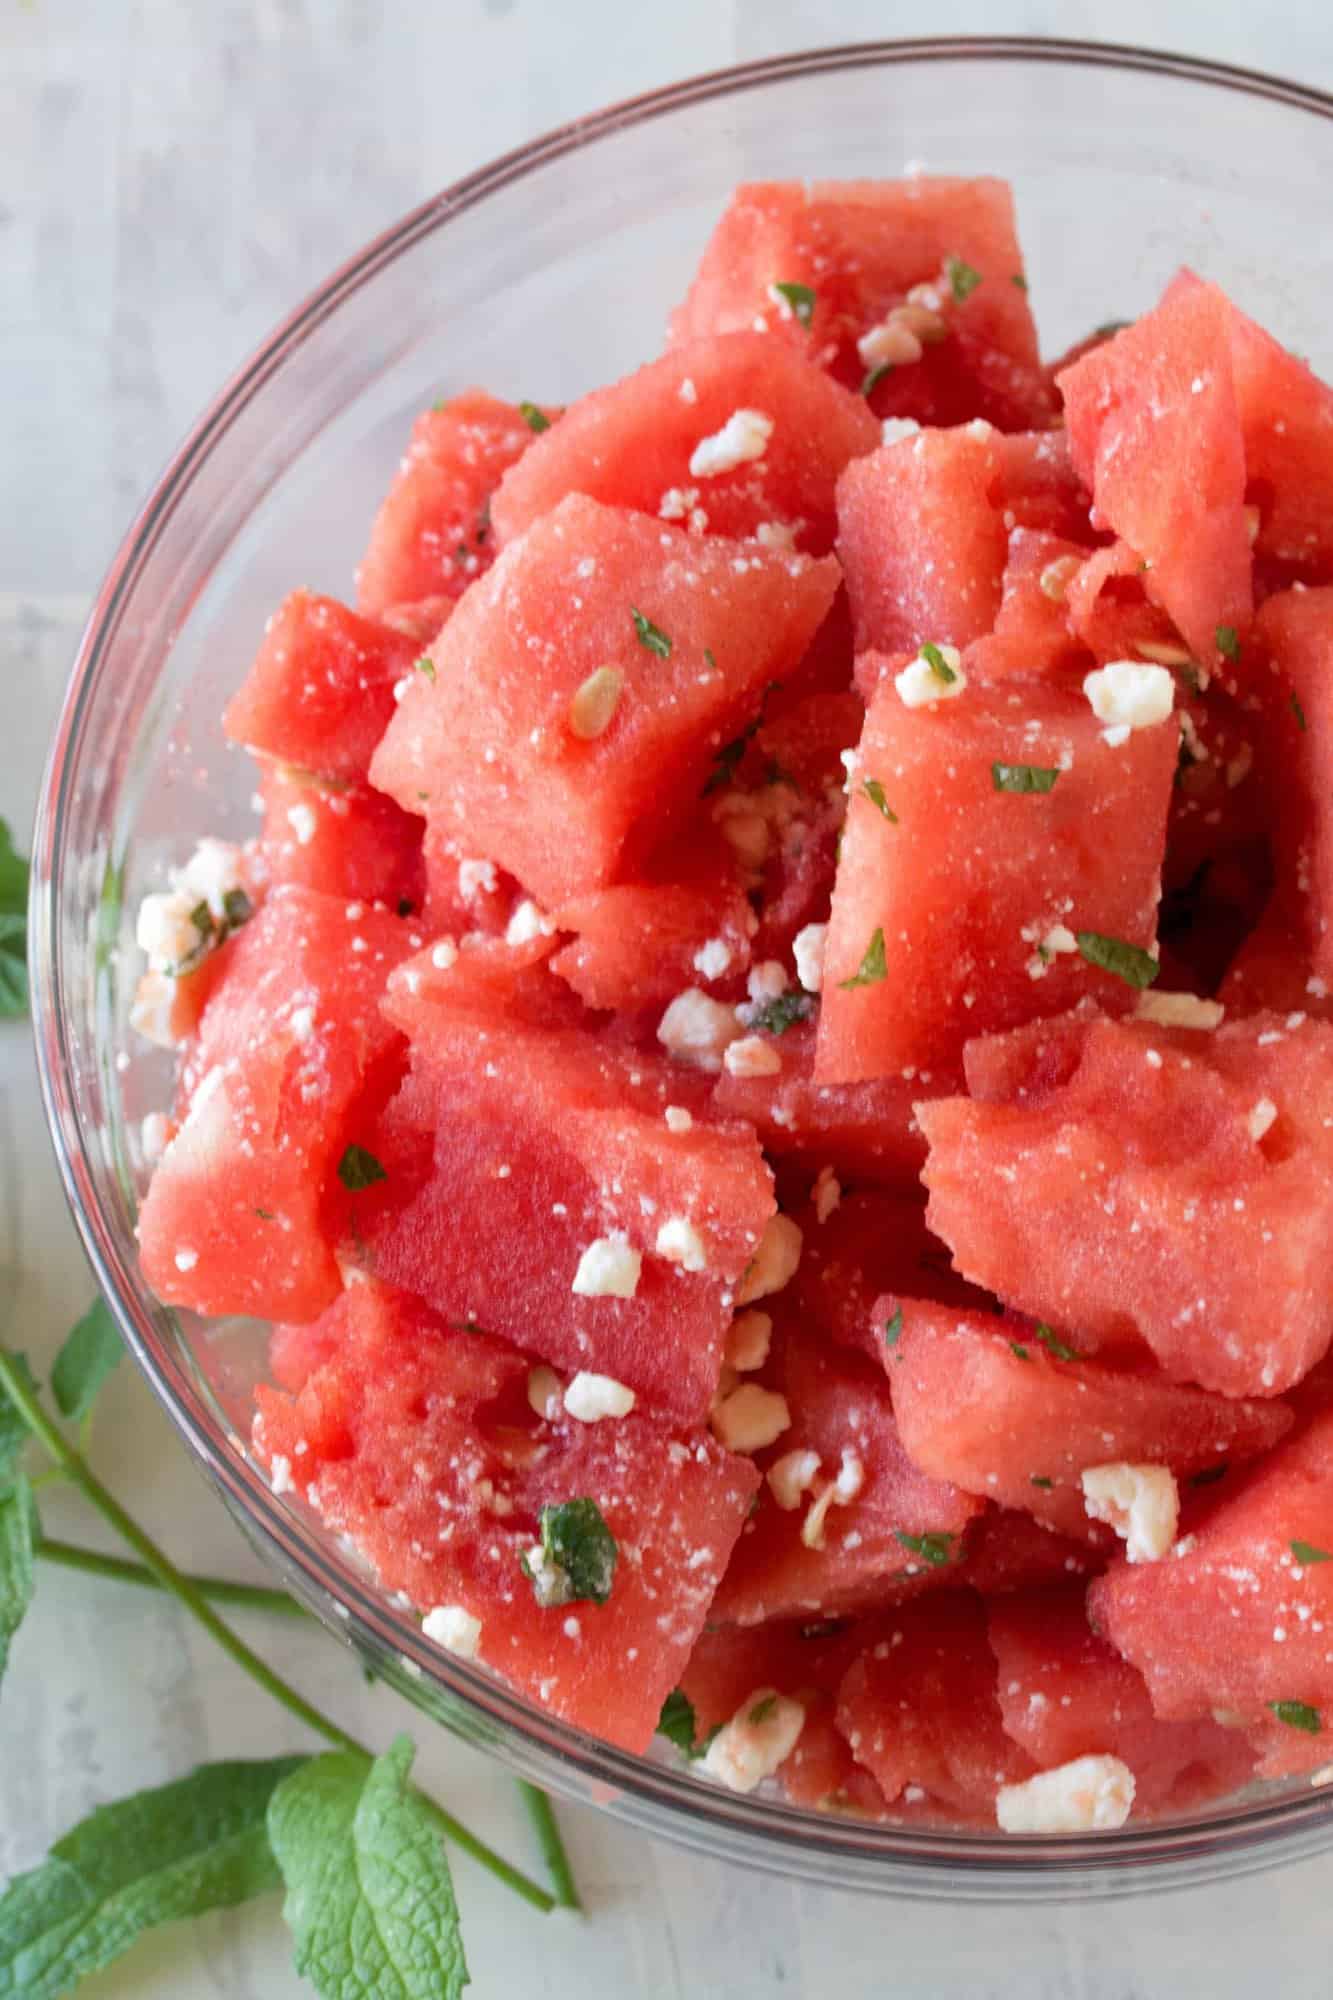 Serve simple summer watermelon up gourmet style with this Watermelon Feta Salad with Mint and Lemon. It's incredibly easy, and oh so tasty!